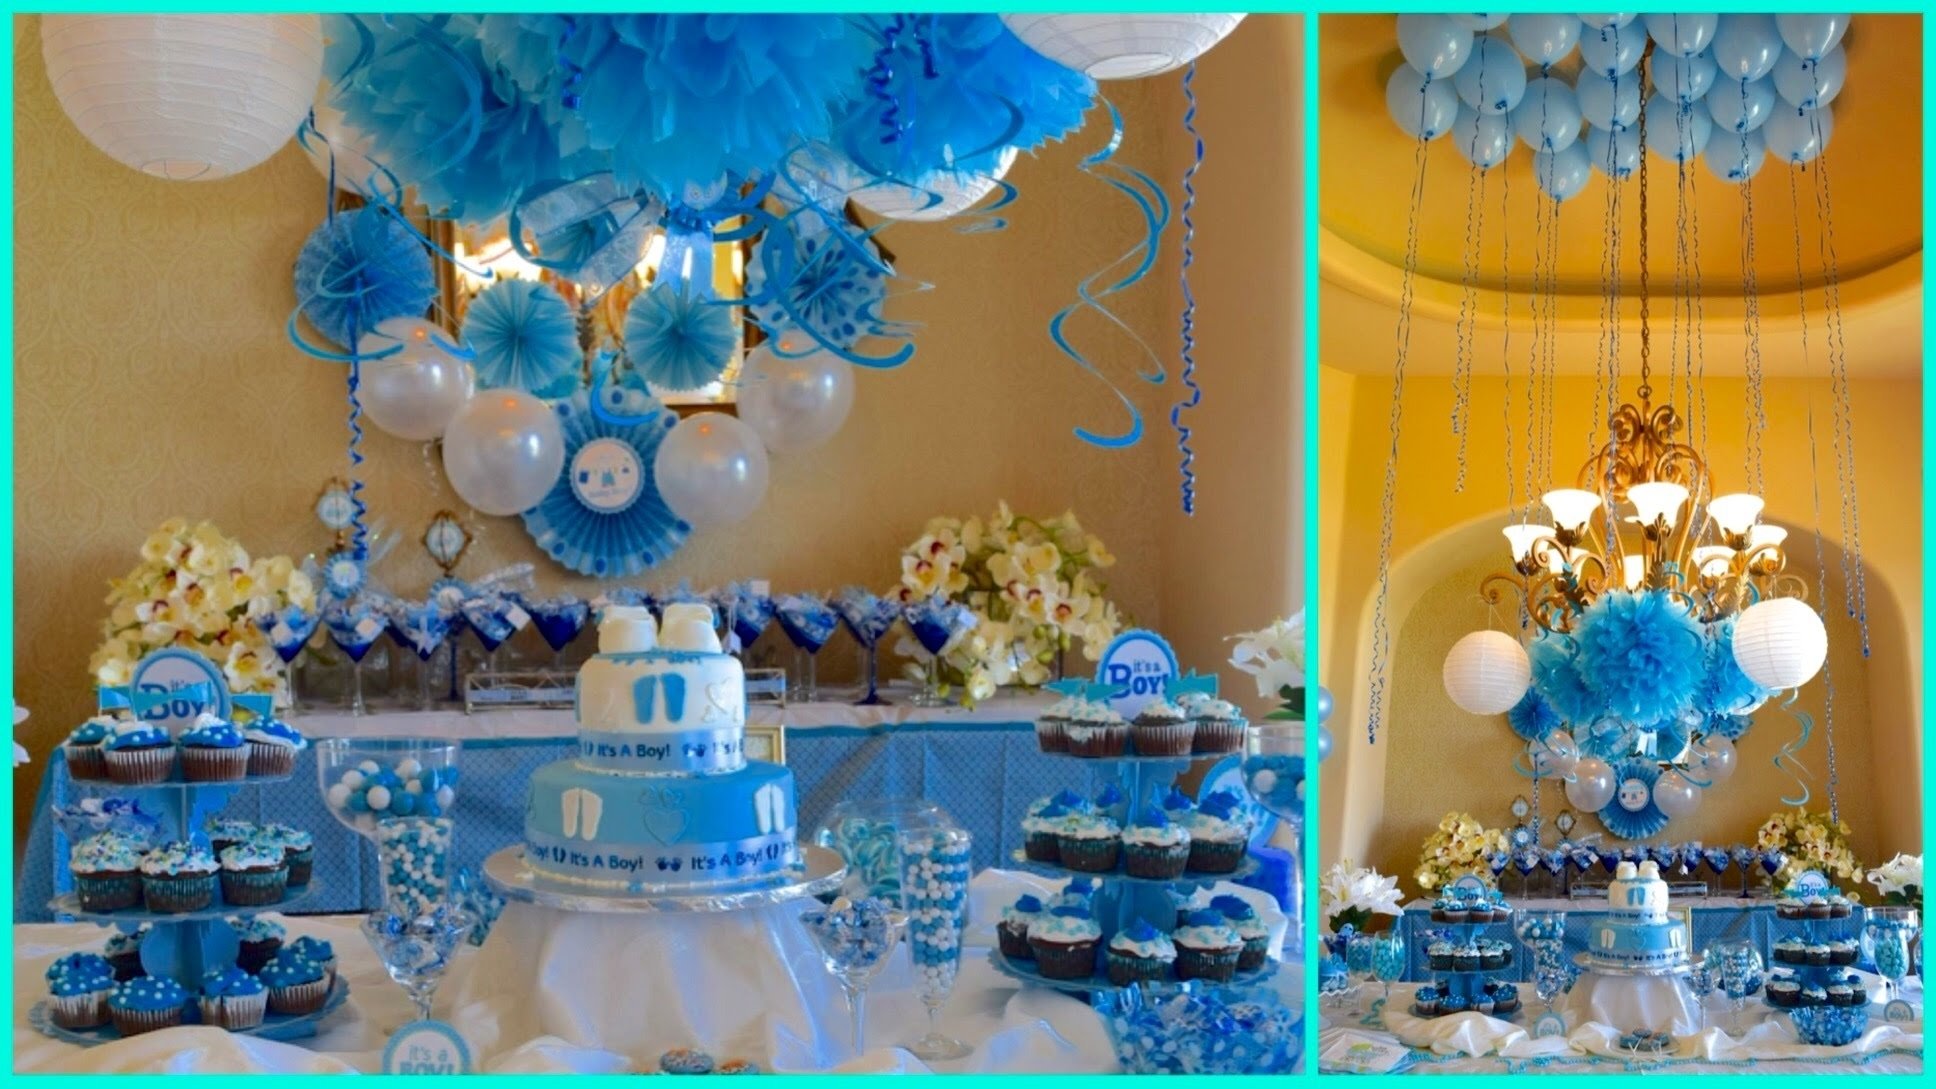 10 Pretty Unique Baby Shower Ideas For A Boy baby shower ideas for boy blue theme youtube 24 2022